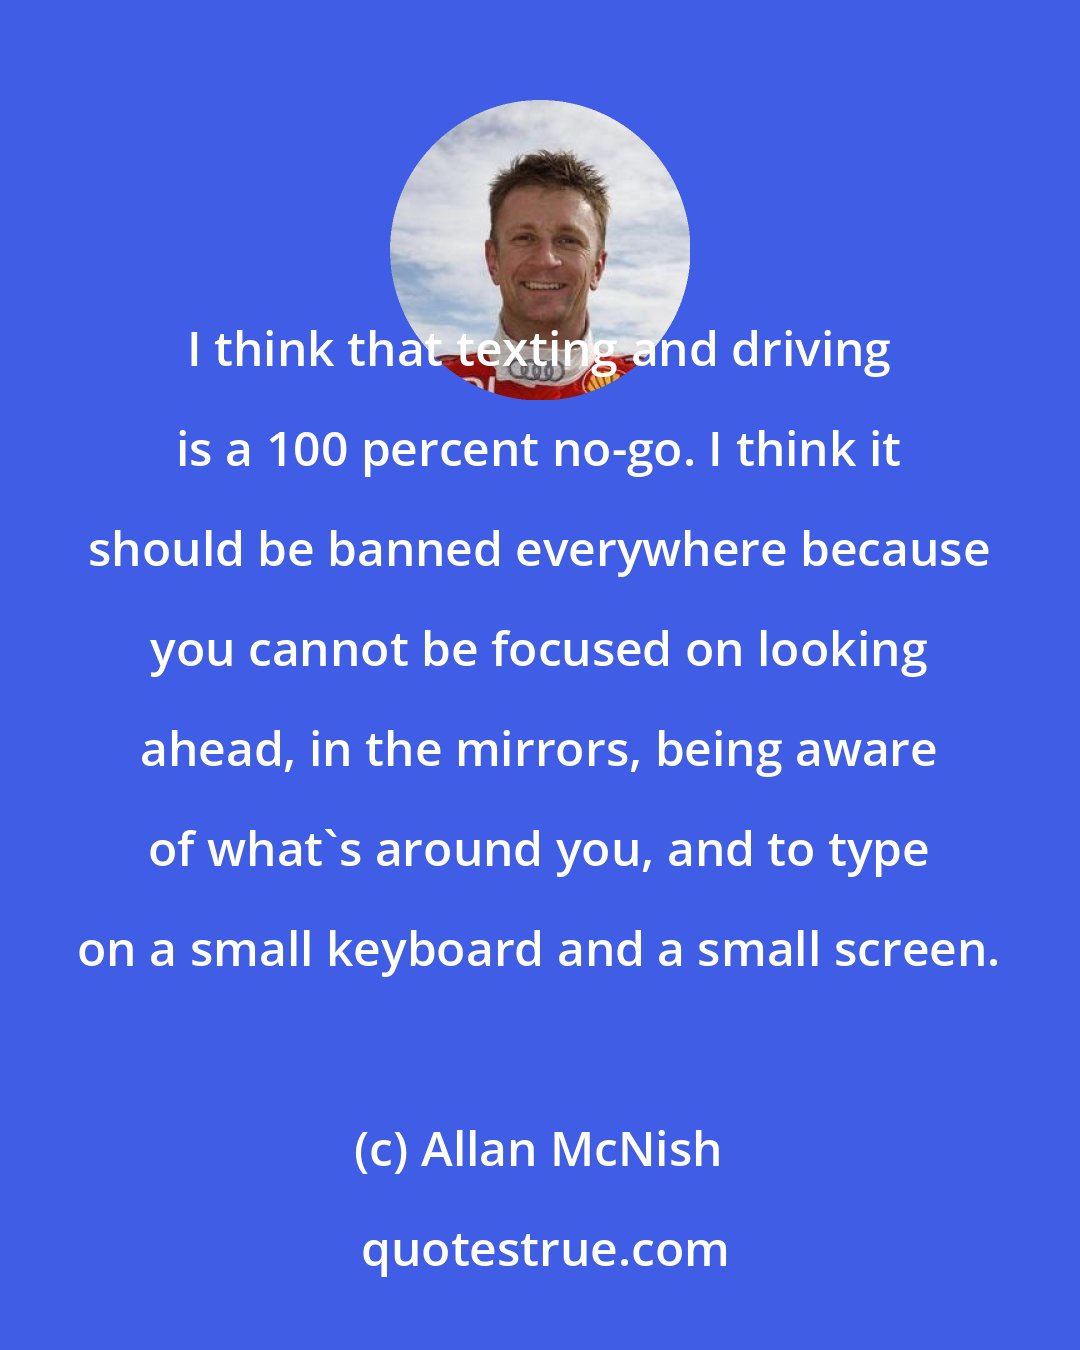 Allan McNish: I think that texting and driving is a 100 percent no-go. I think it should be banned everywhere because you cannot be focused on looking ahead, in the mirrors, being aware of what's around you, and to type on a small keyboard and a small screen.